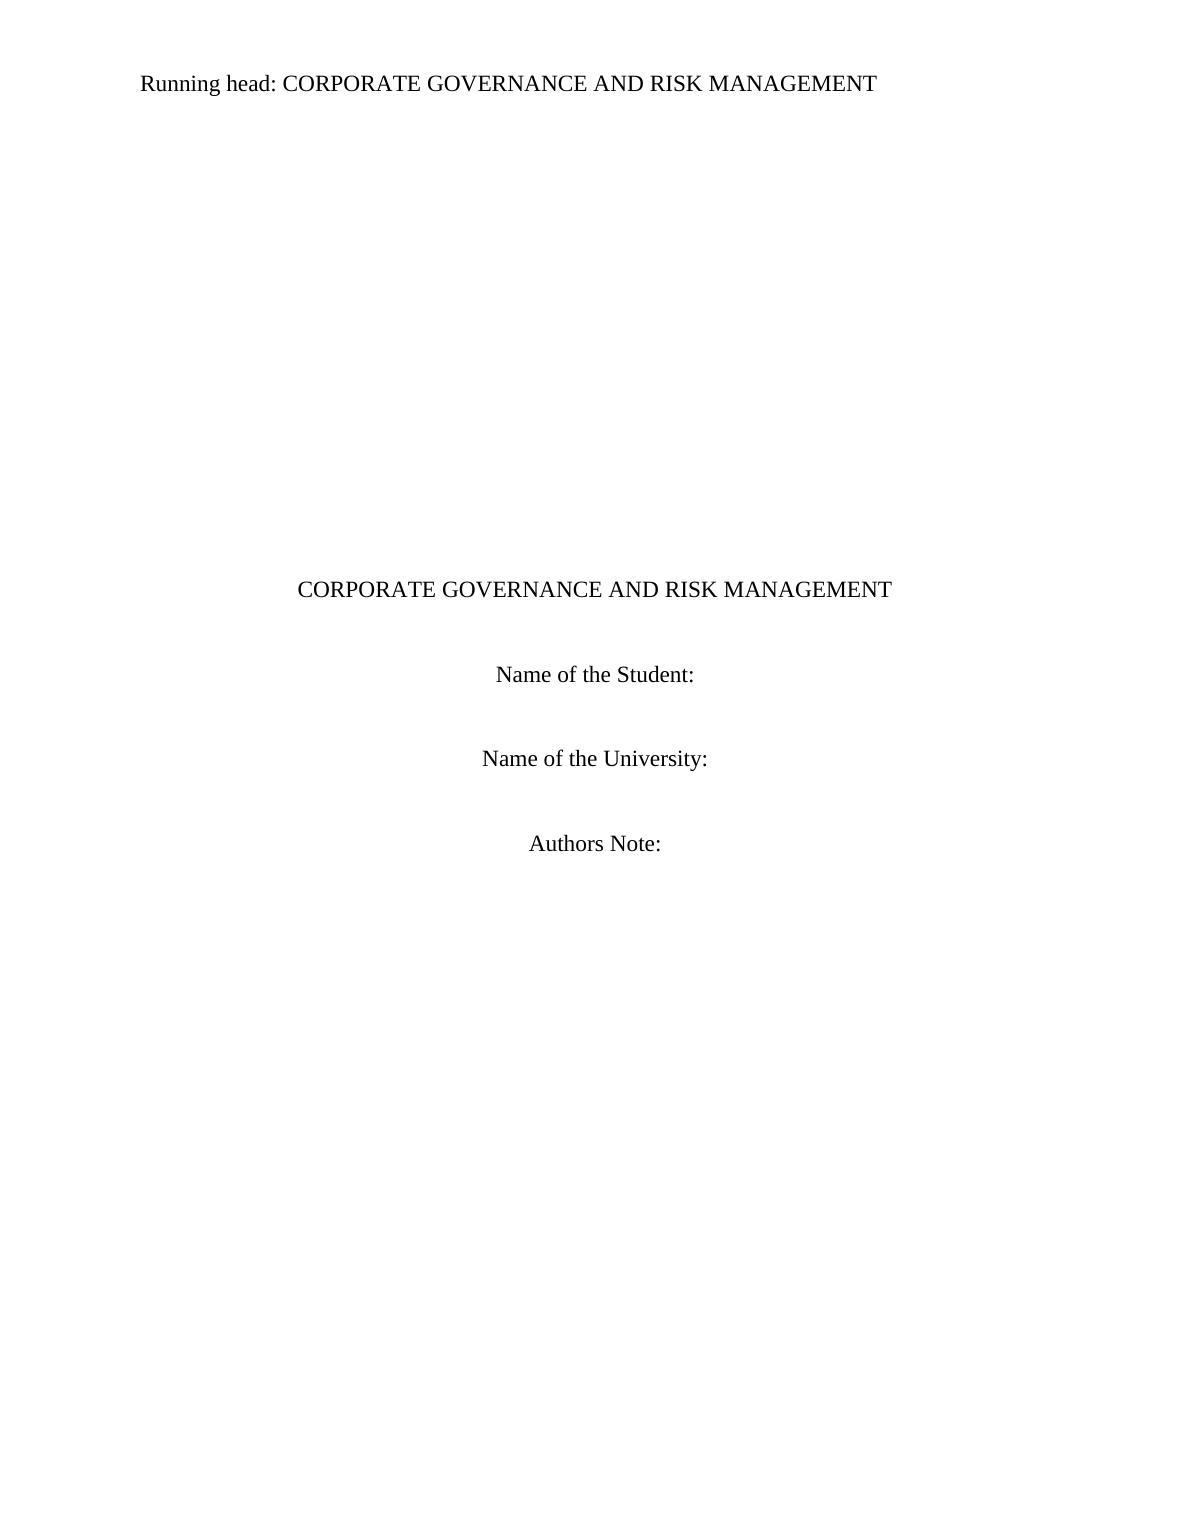 Corporate Governance and Risk Management_1